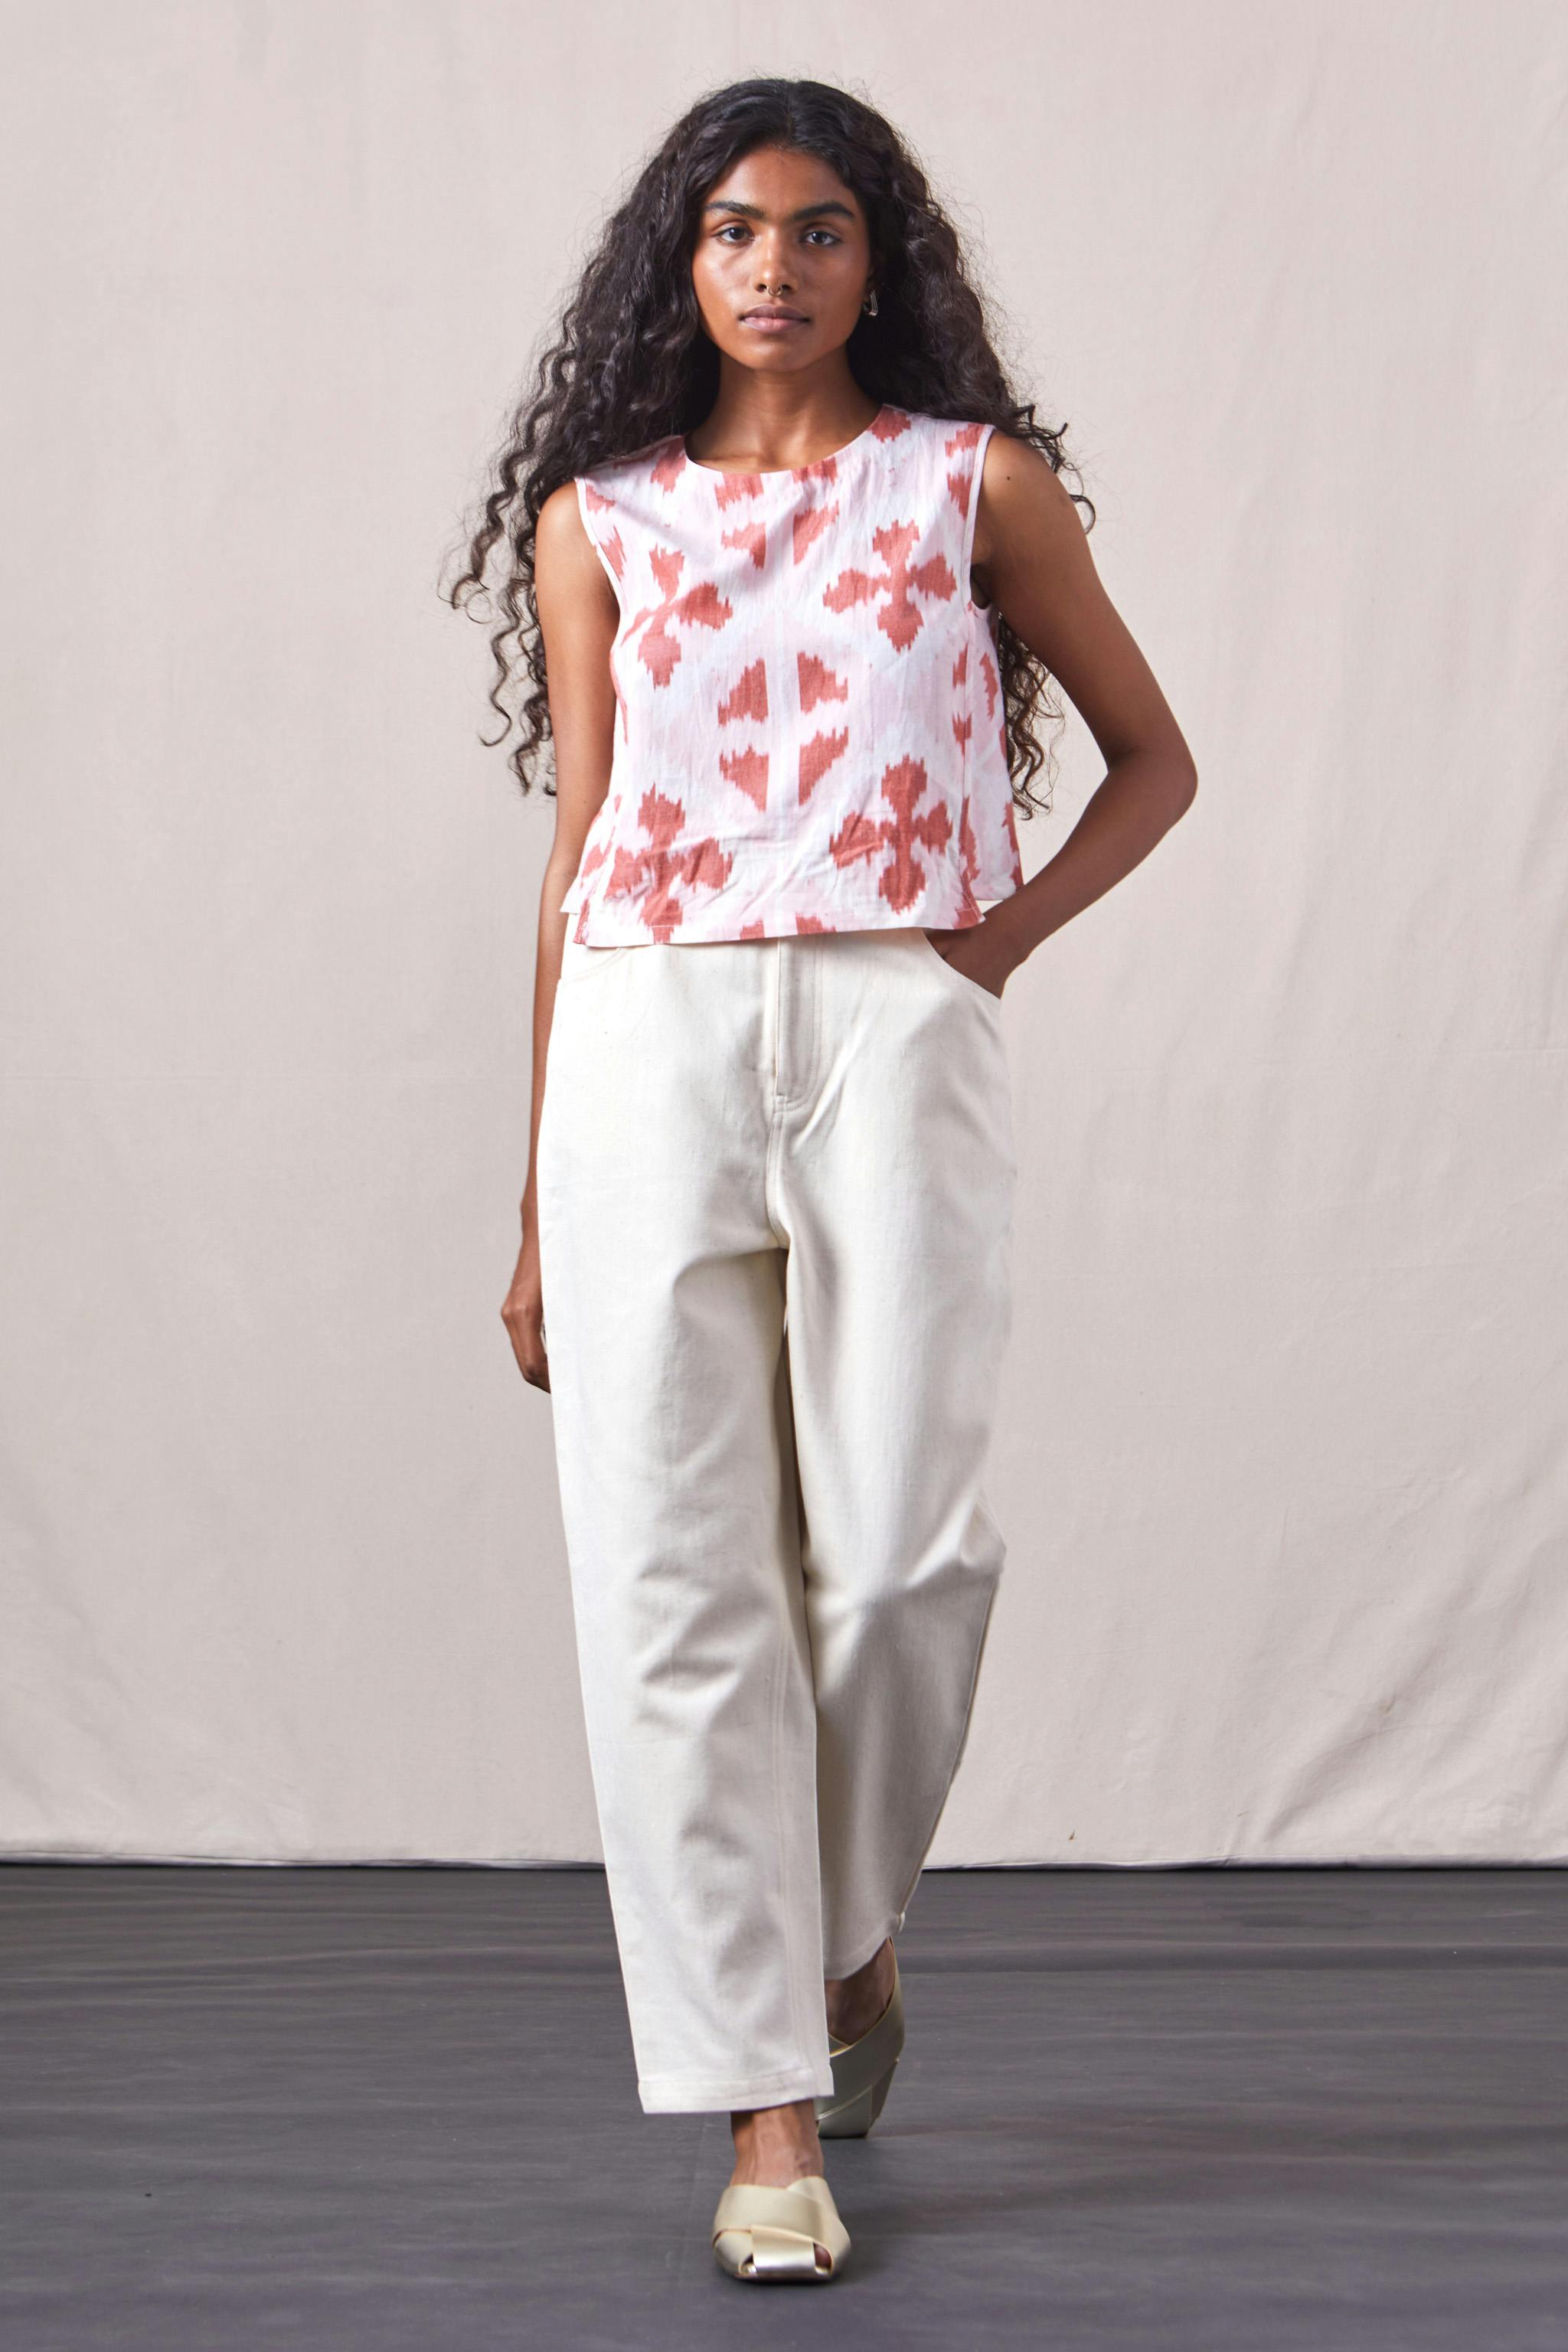 Cay - Ikat Top Pink, a product by The Summer House